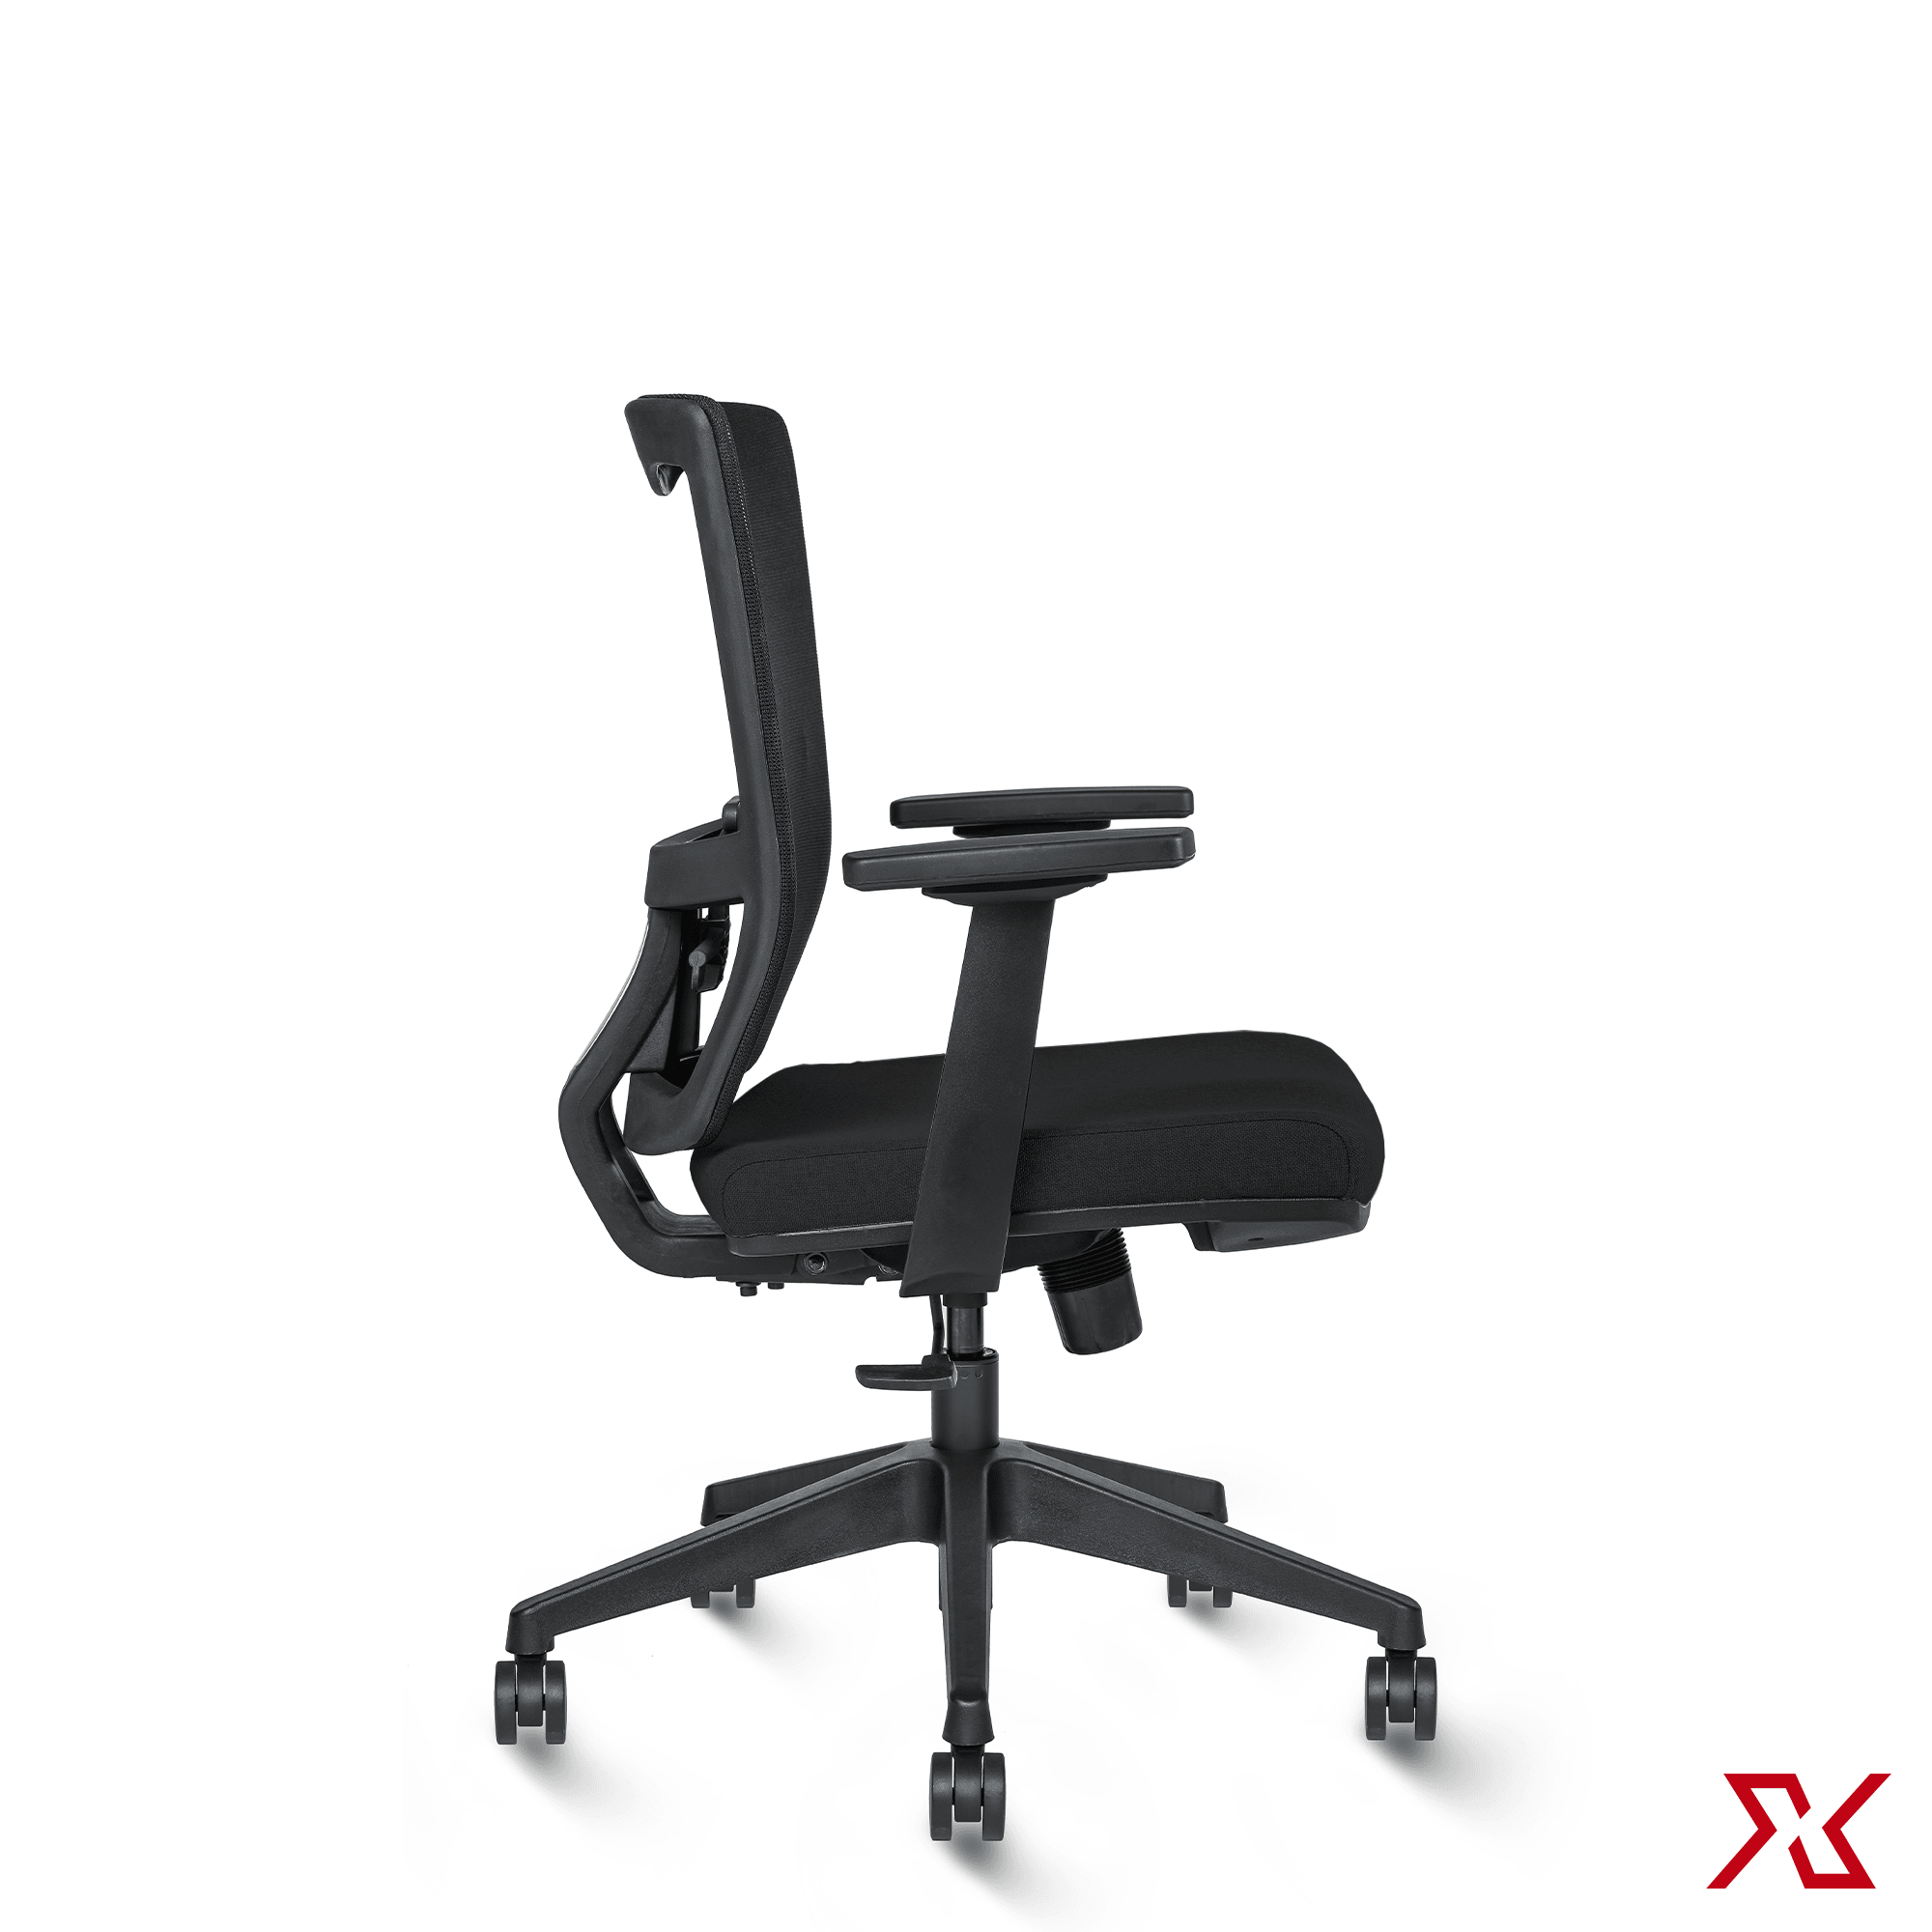 ZAP Medium Back Fly (Black Chair) - Exclusiff Seating Sytems